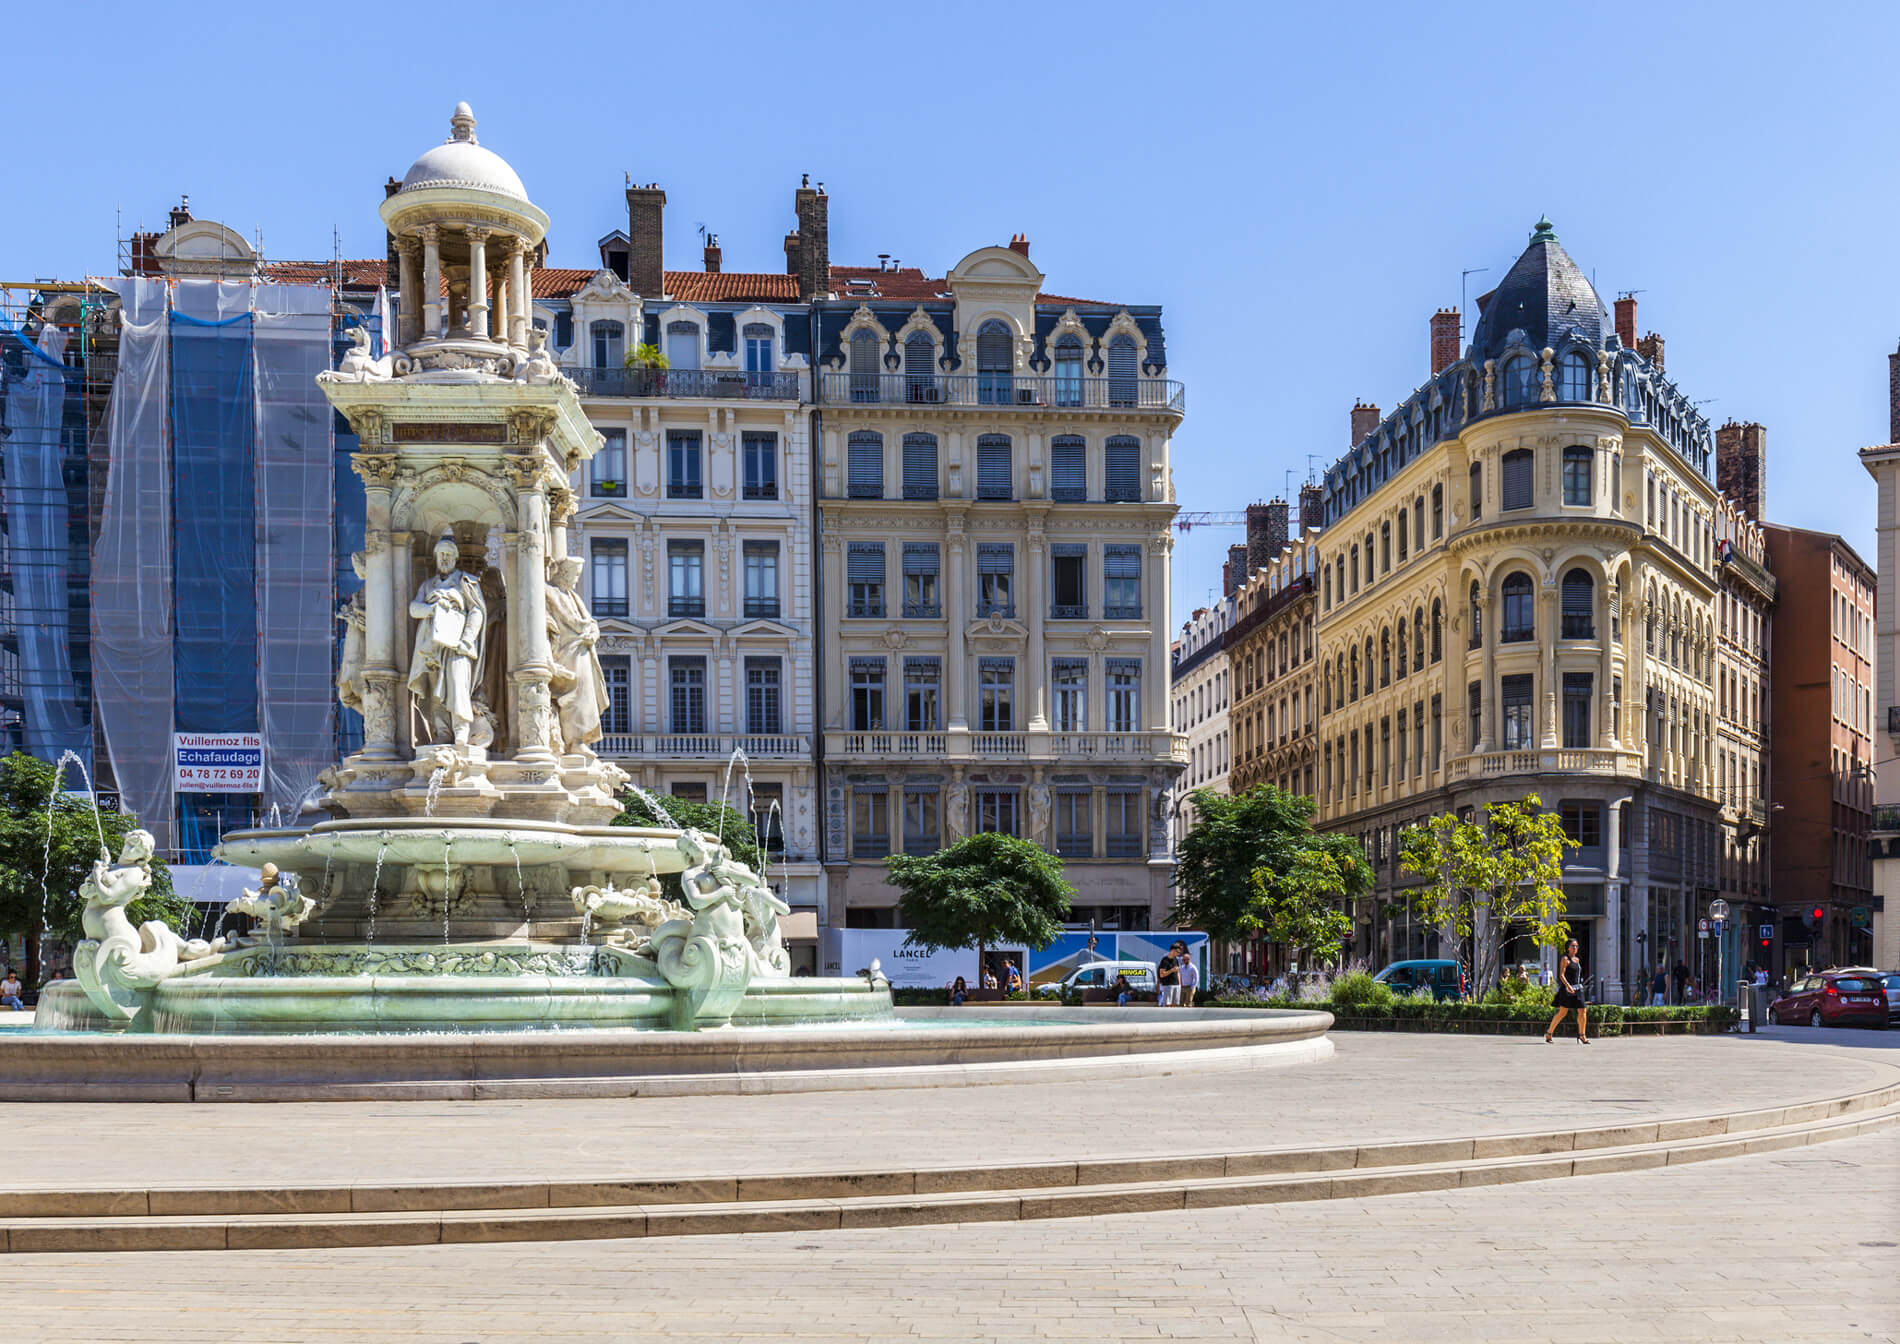 Are you looking for housing in Lyon?